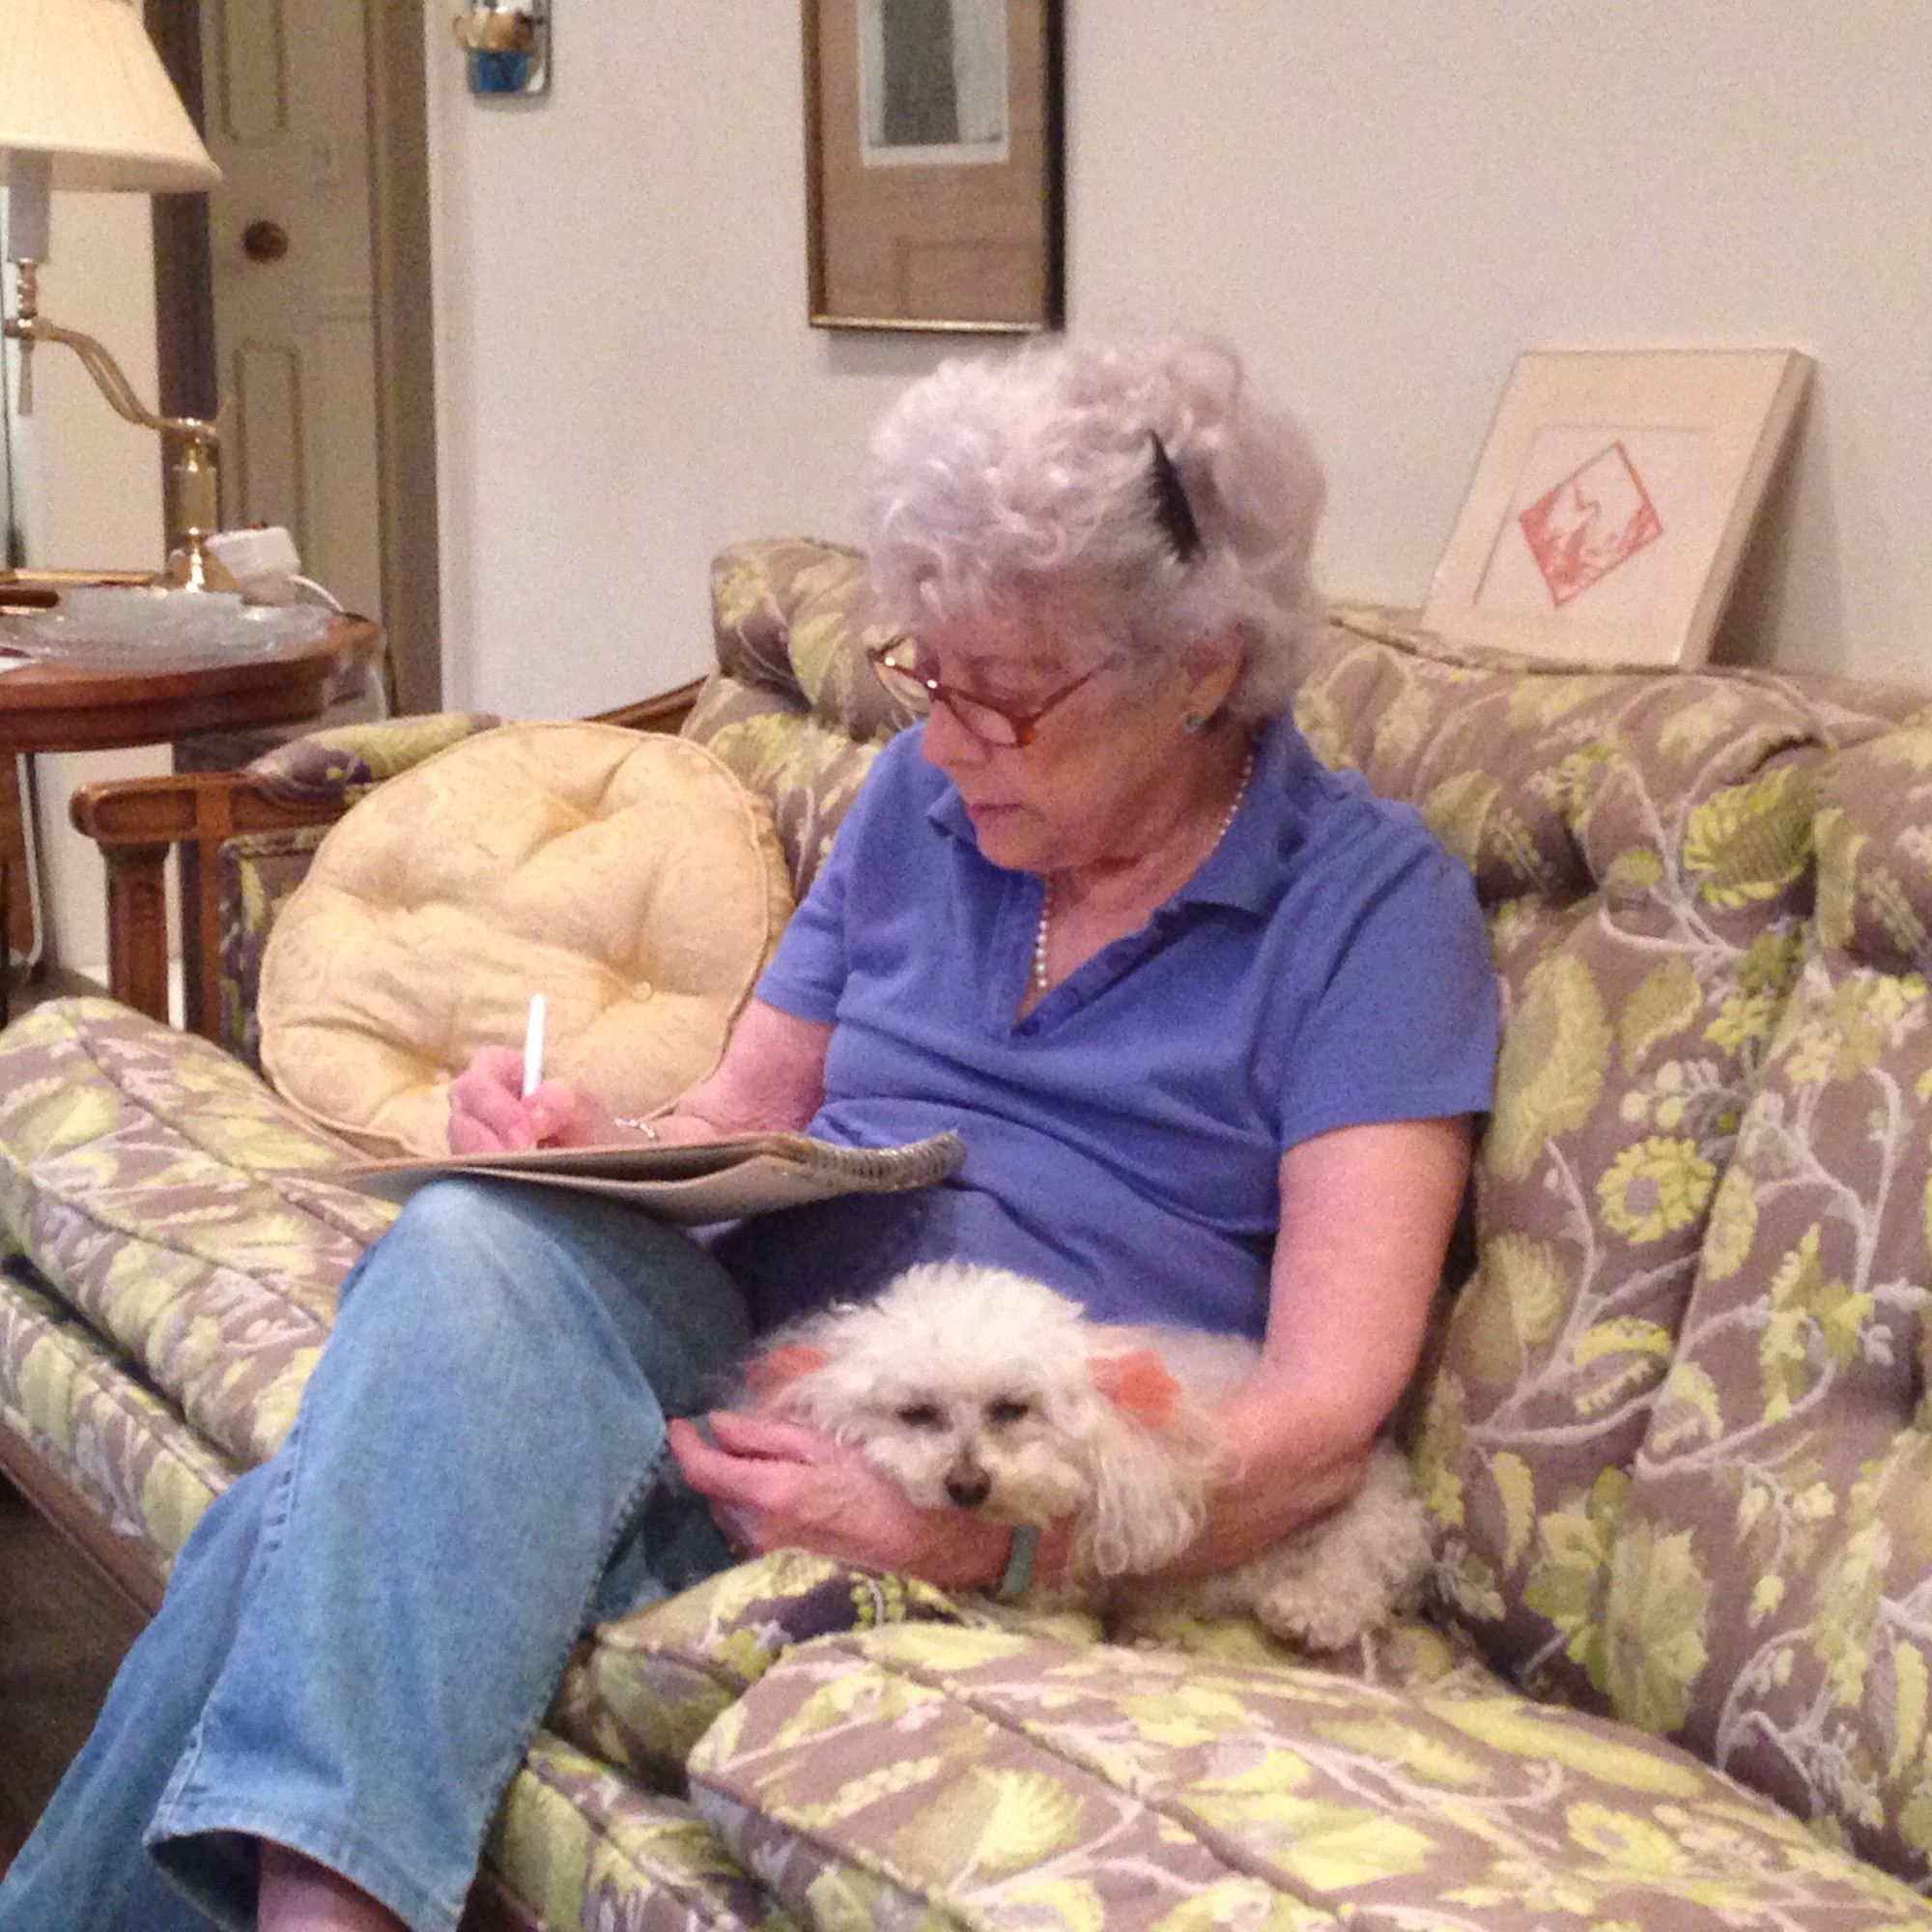 Lenore Kramer solving a New York Times crossword puzzle 
with Schnoodles snuggled next to her.